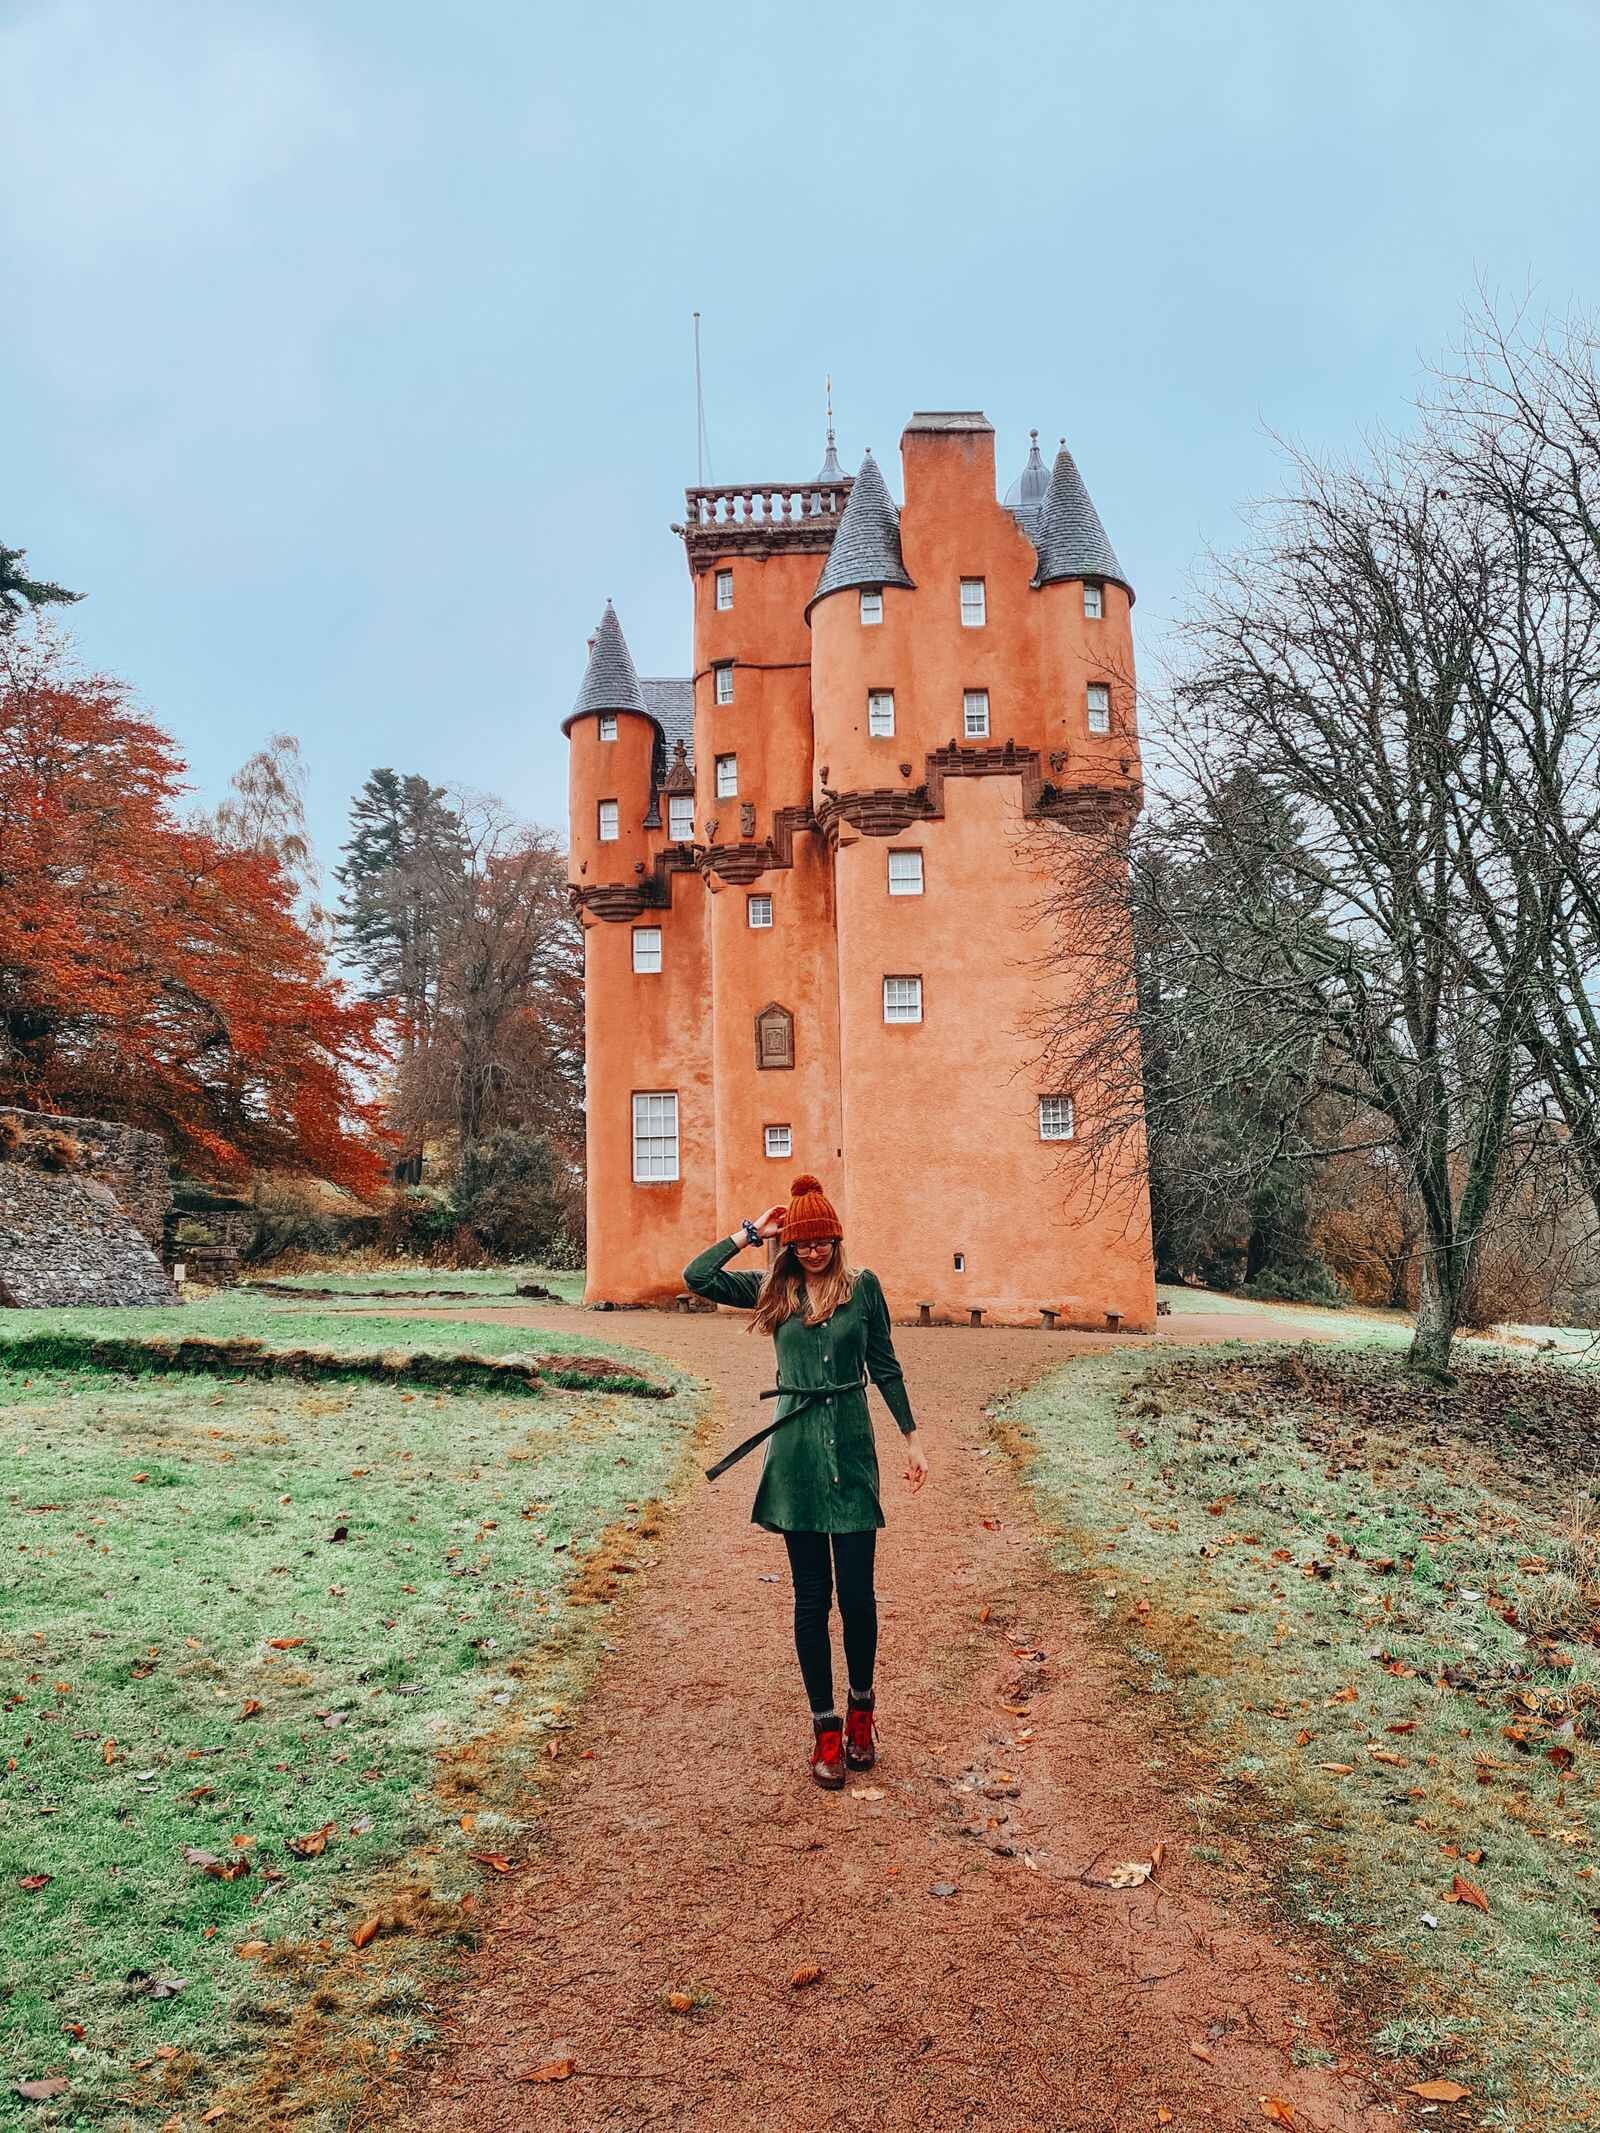 Woman in a green dress walking down a path in front of a large pink castle, Craigievar Castle